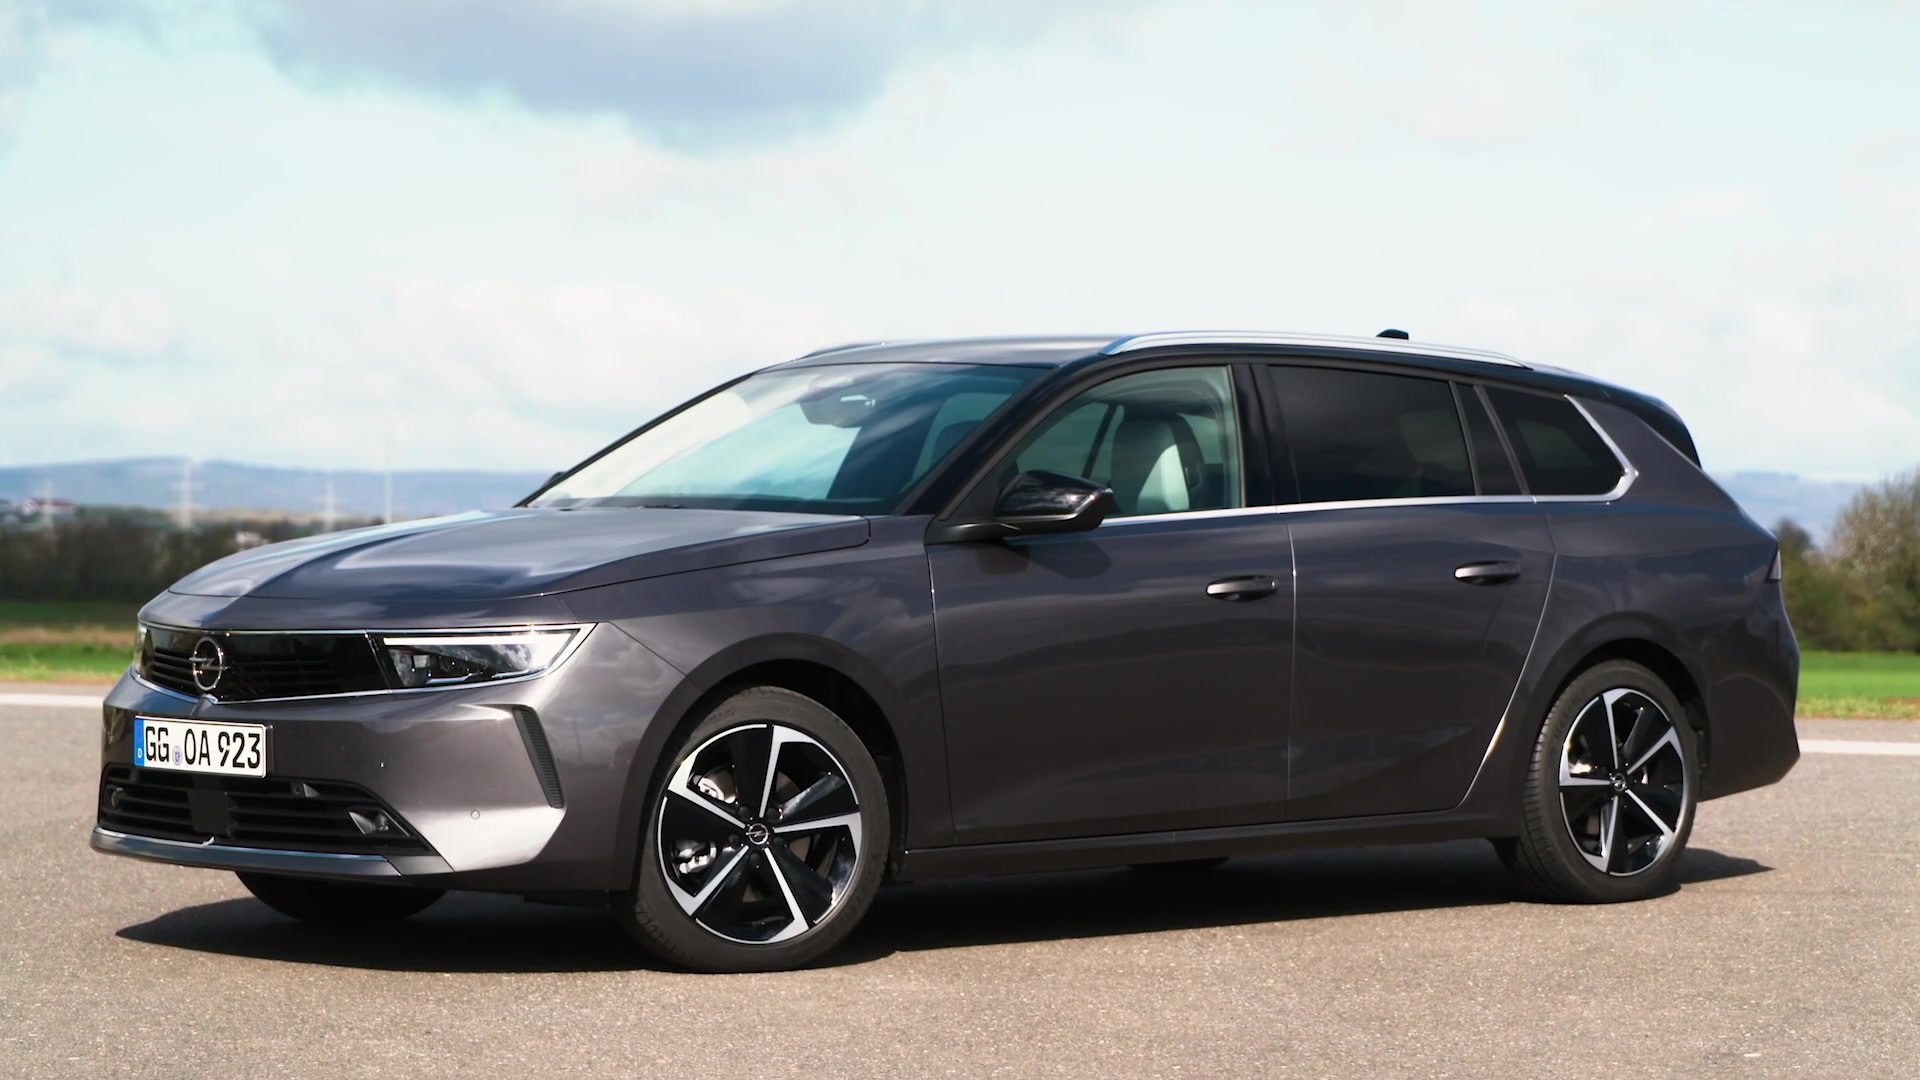 New Opel Astra Sports Tourer: Successful Estate With Long Tradition, Opel